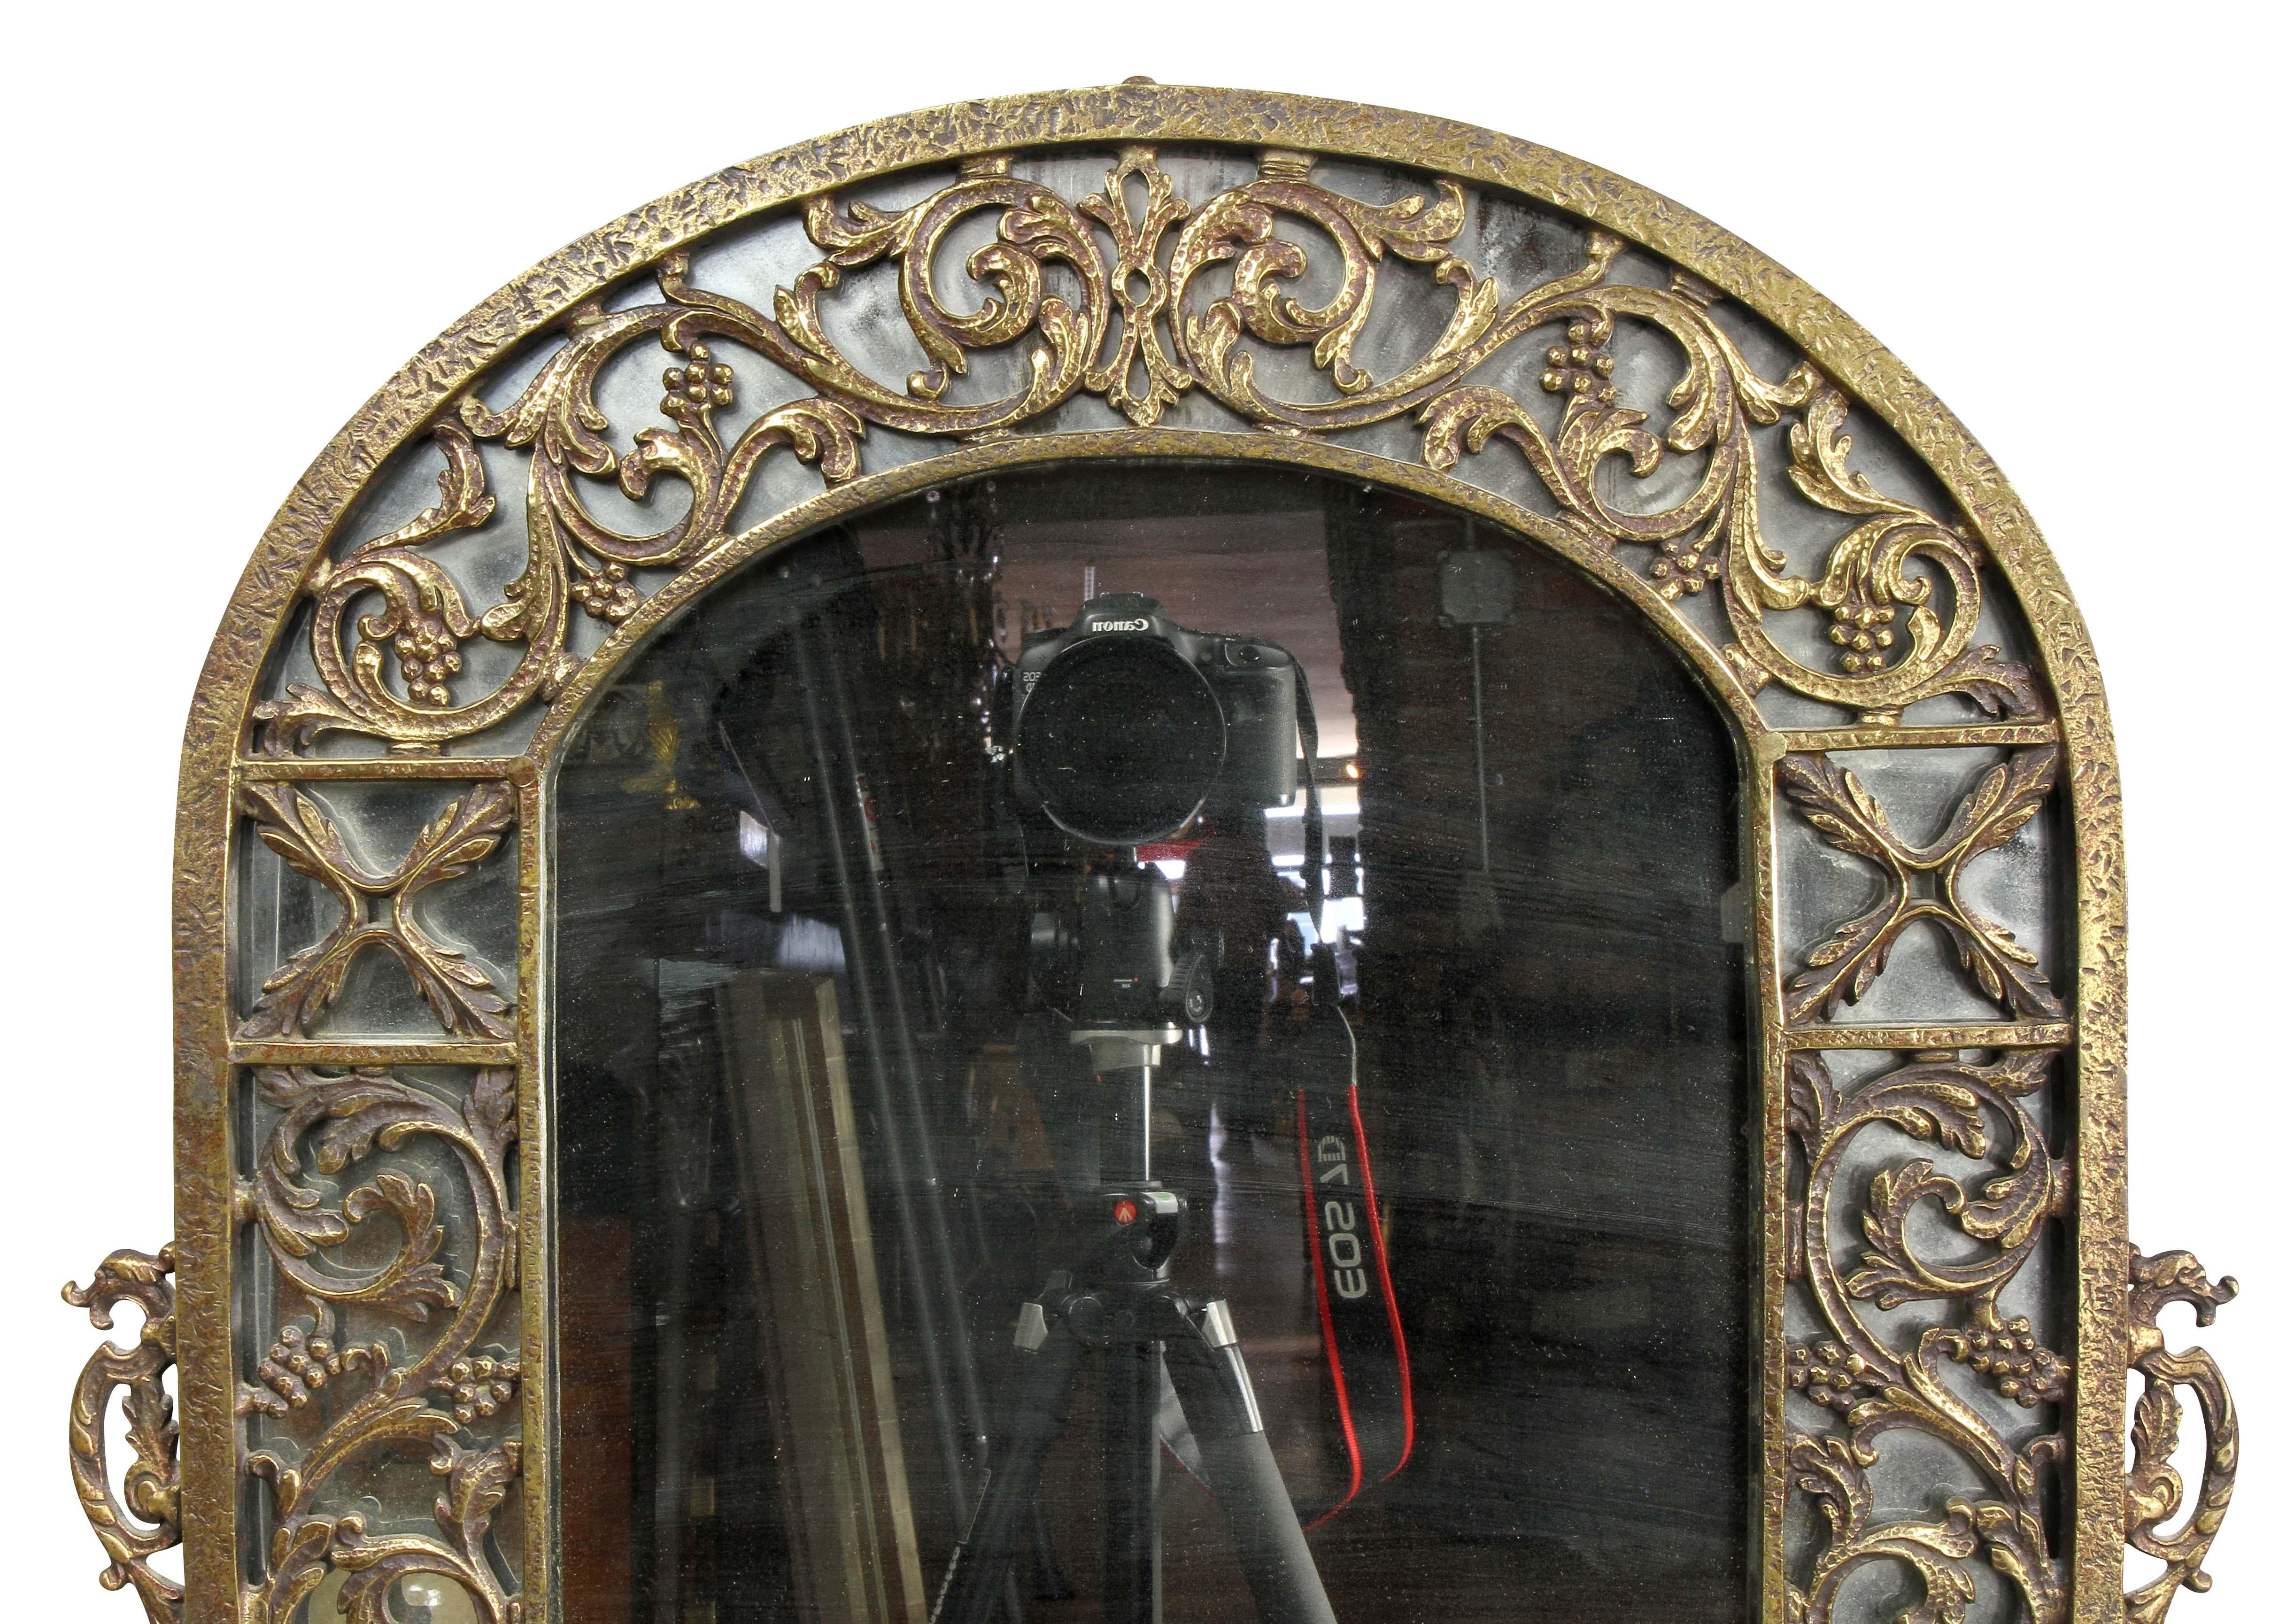 Unsigned with arched top with outer mirror frame with trailing leaf decoration surrounding a conforming mirror plate.